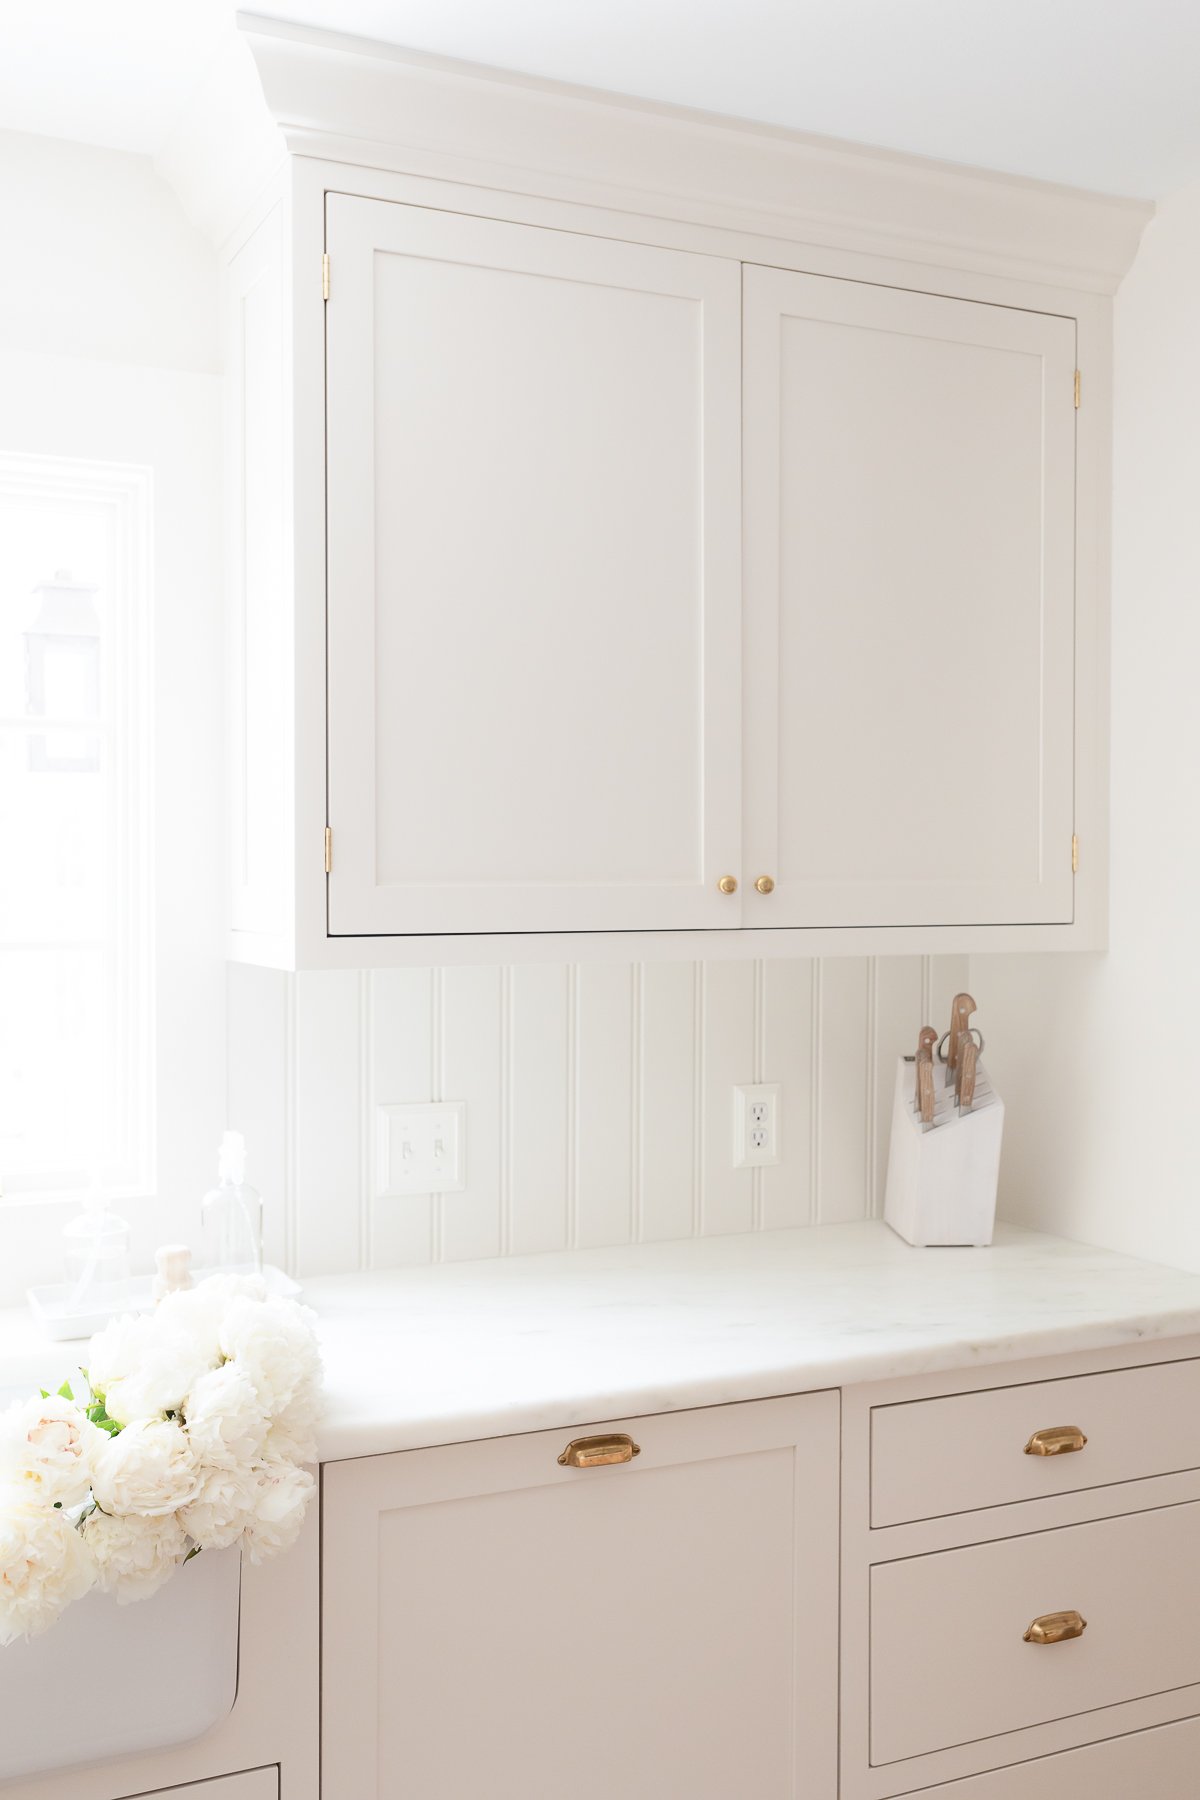 A minimalist kitchen with cream cabinets, marble countertops and white flowers in the sink.